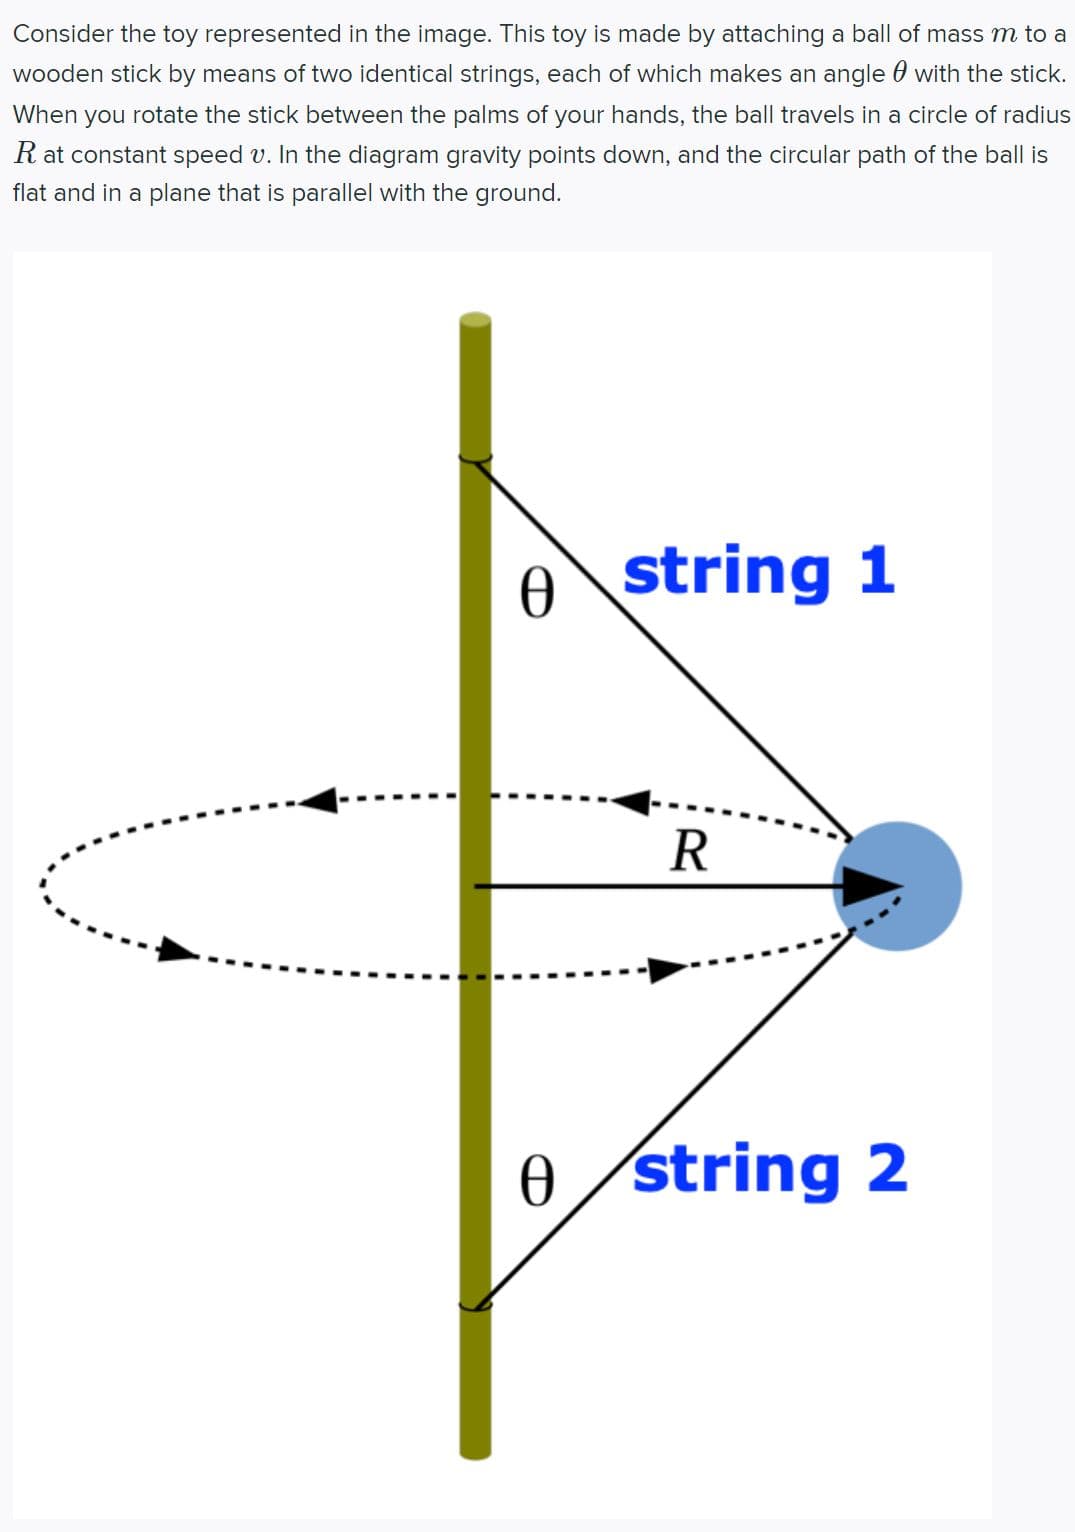 Consider the toy represented in the image. This toy is made by attaching a ball of mass m to a
wooden stick by means of two identical strings, each of which makes an angle with the stick.
When you rotate the stick between the palms of your hands, the ball travels in a circle of radius
R at constant speed v. In the diagram gravity points down, and the circular path of the ball is
flat and in a plane that is parallel with the ground.
Ꮎ
Ꮎ
string 1
R
string 2